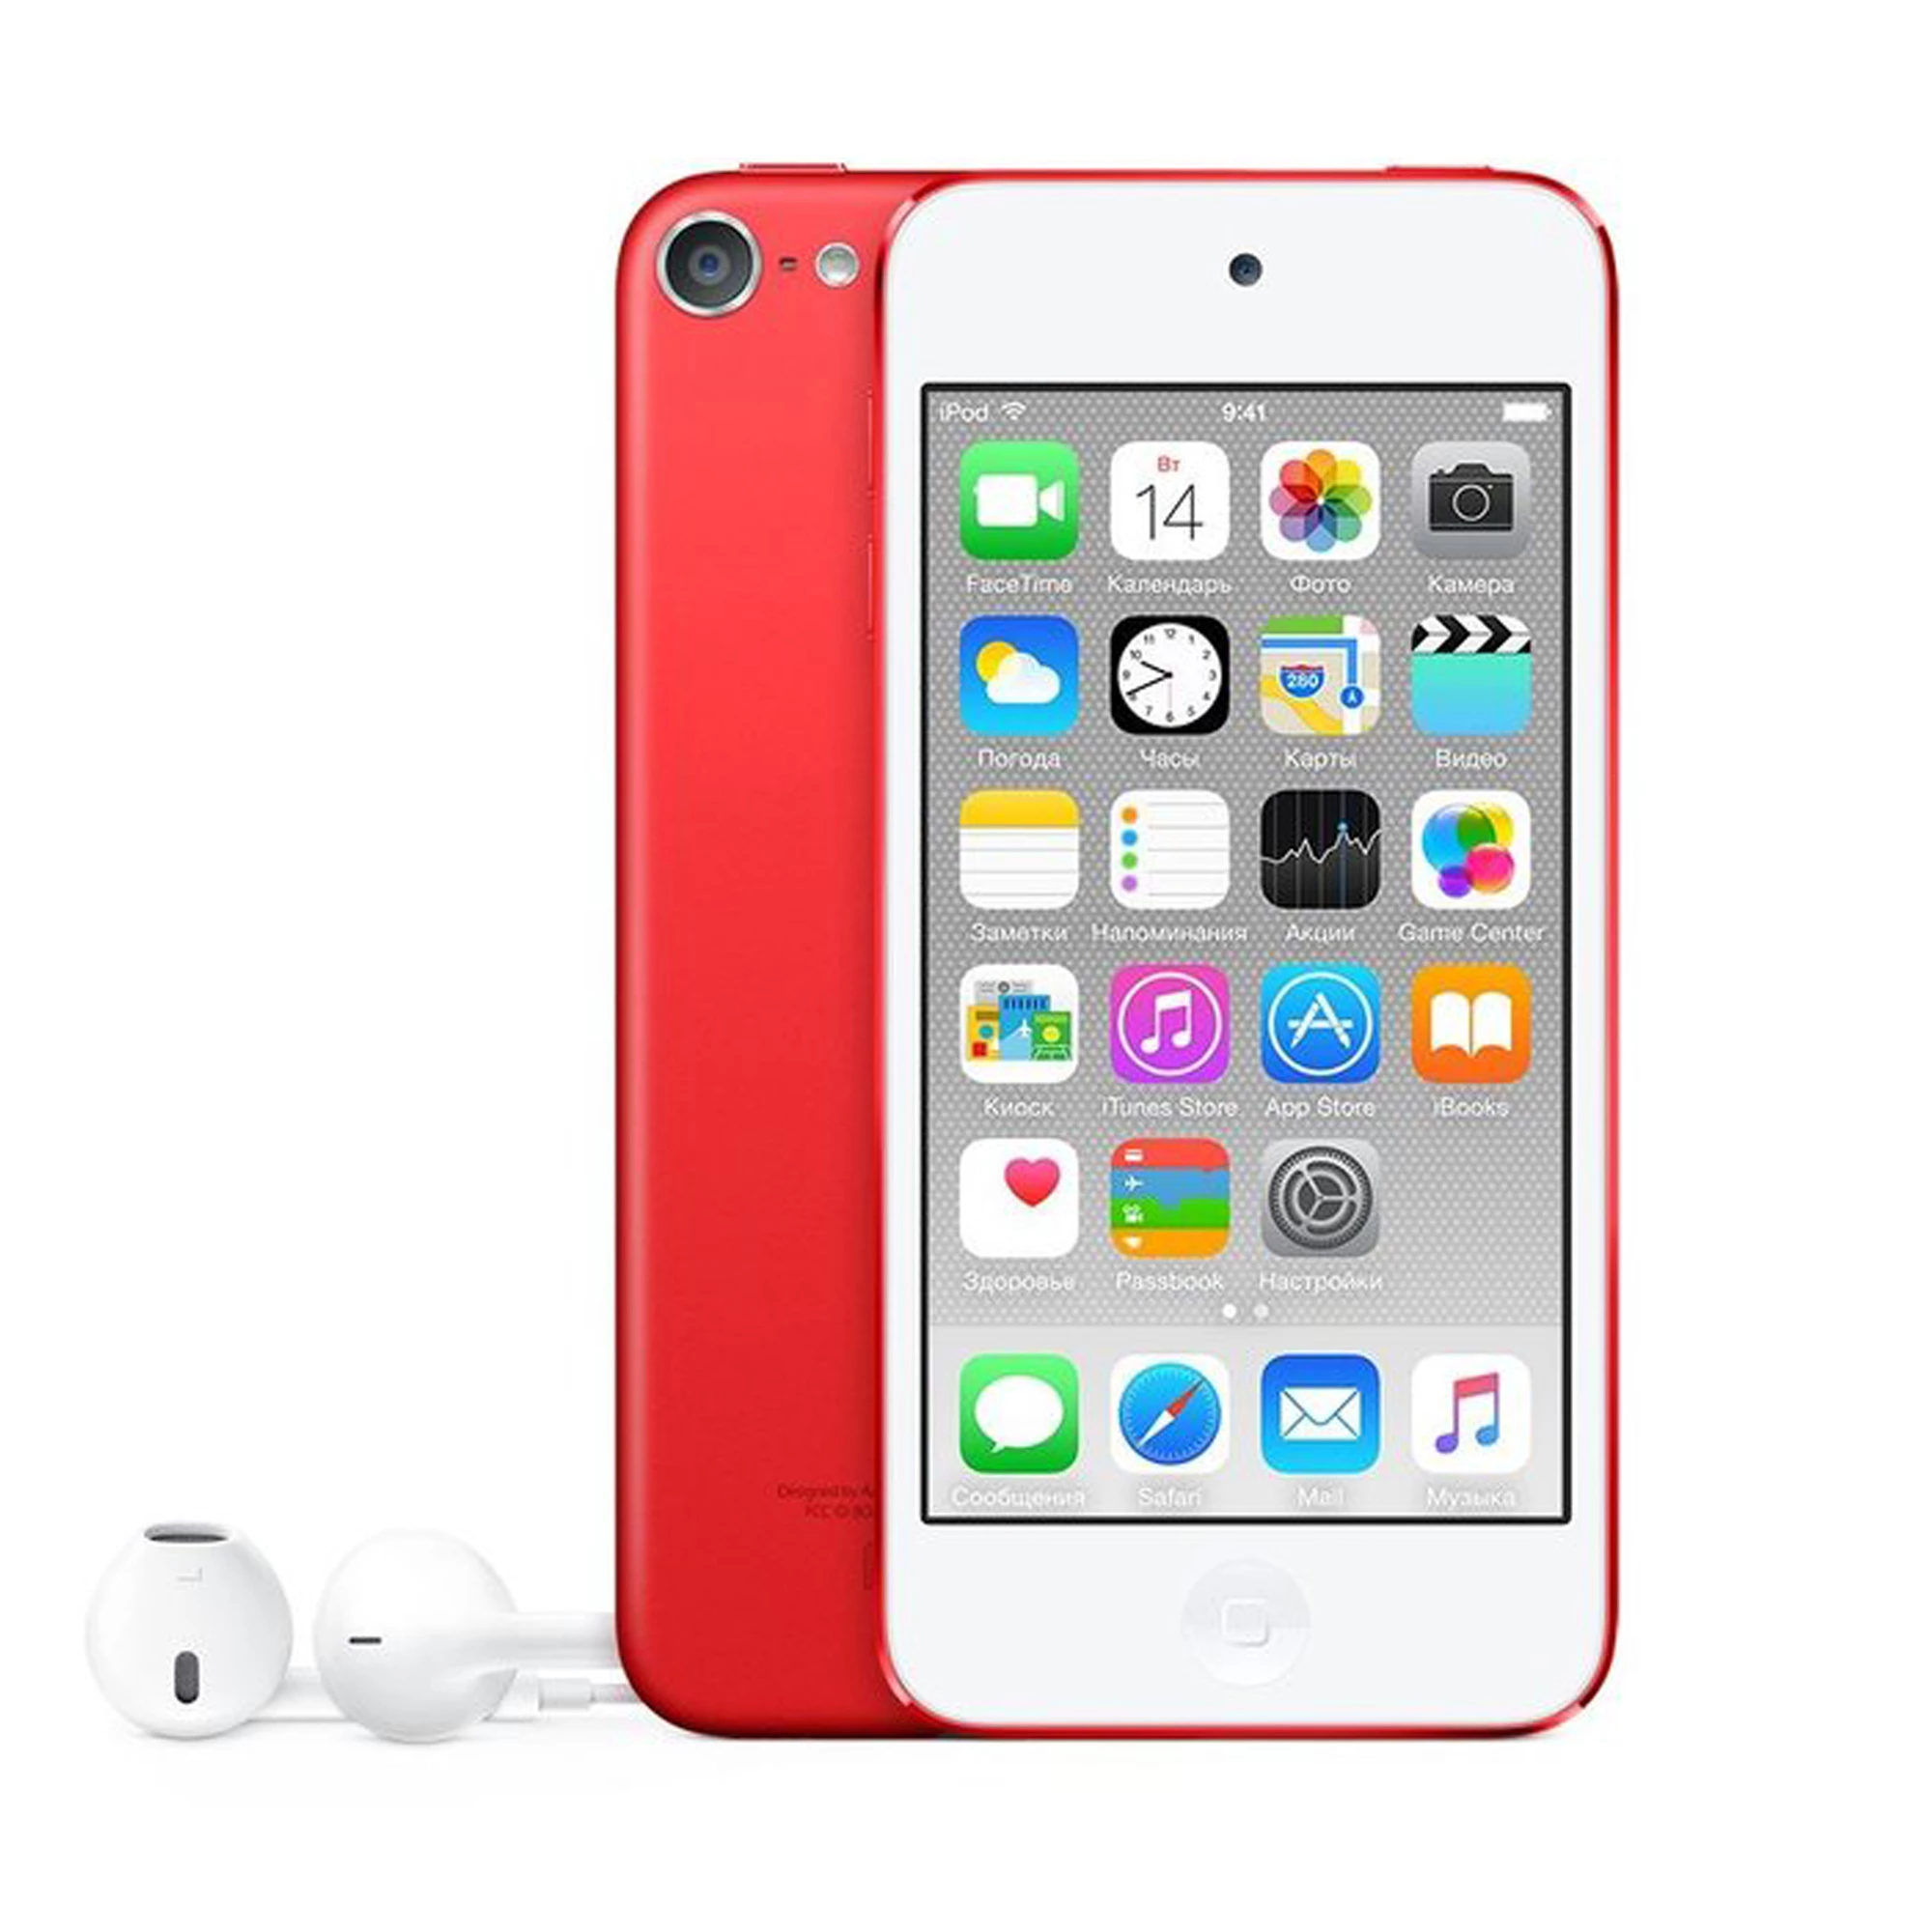 iPod touch 6Gen 32GB Red (MKJ22)